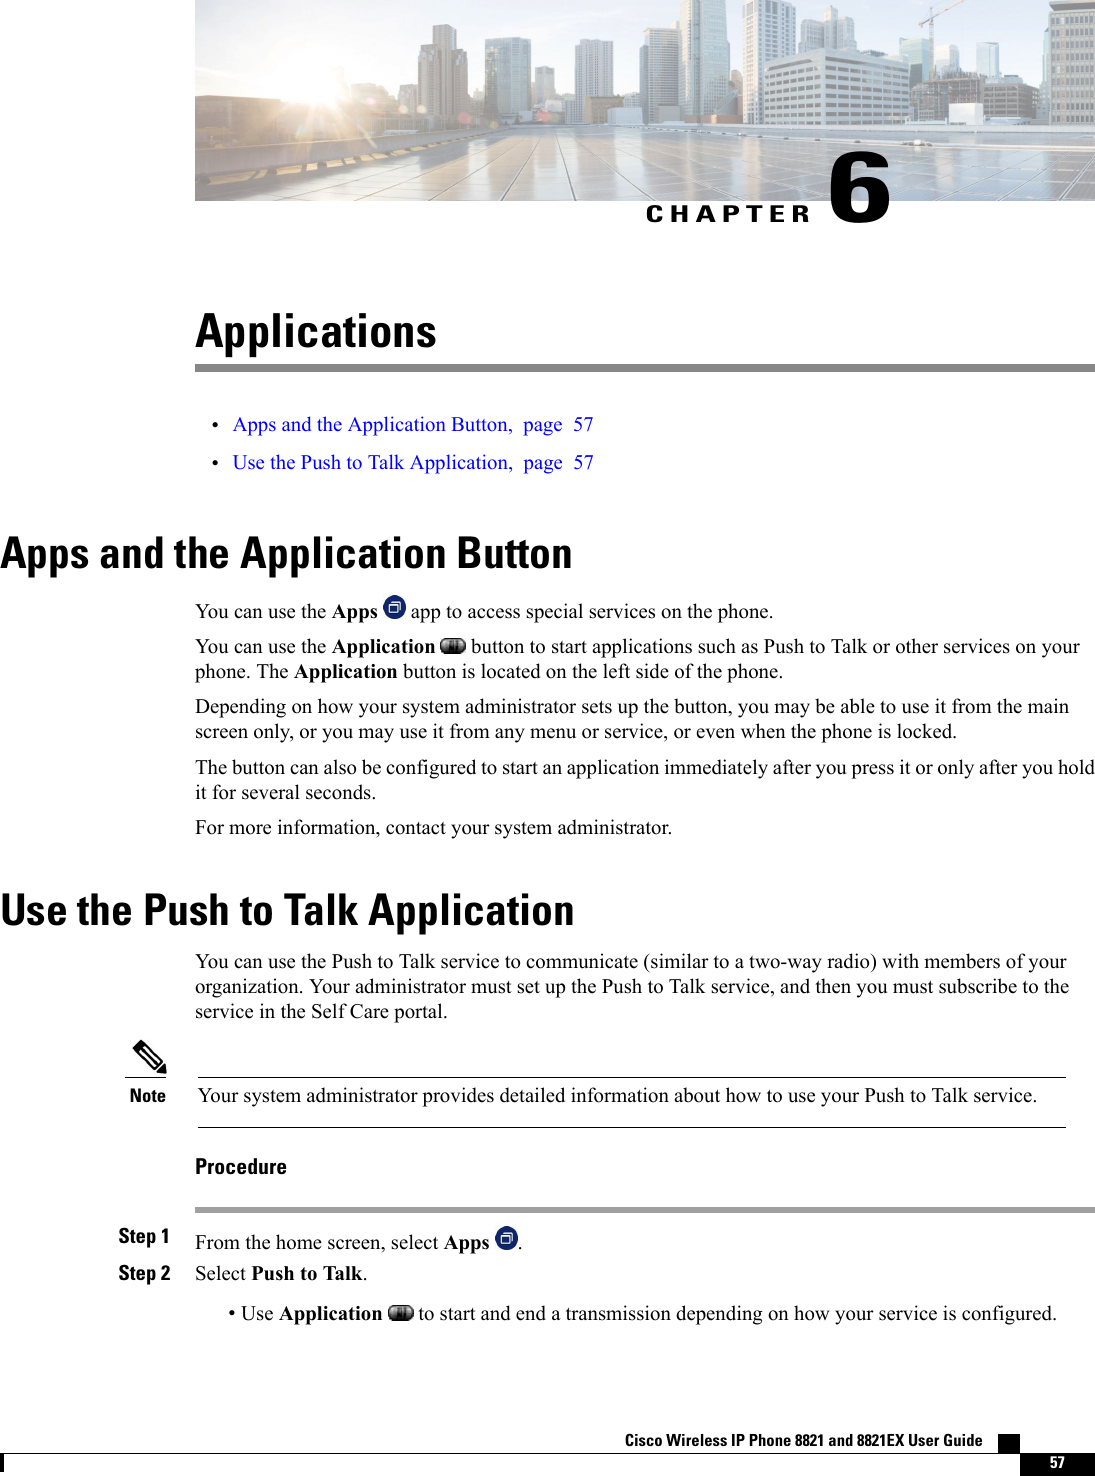 CHAPTER 6Applications•Apps and the Application Button, page 57•Use the Push to Talk Application, page 57Apps and the Application ButtonYou can use the Apps app to access special services on the phone.You can use the Application button to start applications such as Push to Talk or other services on yourphone. The Application button is located on the left side of the phone.Depending on how your system administrator sets up the button, you may be able to use it from the mainscreen only, or you may use it from any menu or service, or even when the phone is locked.The button can also be configured to start an application immediately after you press it or only after you holdit for several seconds.For more information, contact your system administrator.Use the Push to Talk ApplicationYou can use the Push to Talk service to communicate (similar to a two-way radio) with members of yourorganization. Your administrator must set up the Push to Talk service, and then you must subscribe to theservice in the Self Care portal.Your system administrator provides detailed information about how to use your Push to Talk service.NoteProcedureStep 1 From the home screen, select Apps .Step 2 Select Push to Talk.•Use Application to start and end a transmission depending on how your service is configured.Cisco Wireless IP Phone 8821 and 8821EX User Guide    57